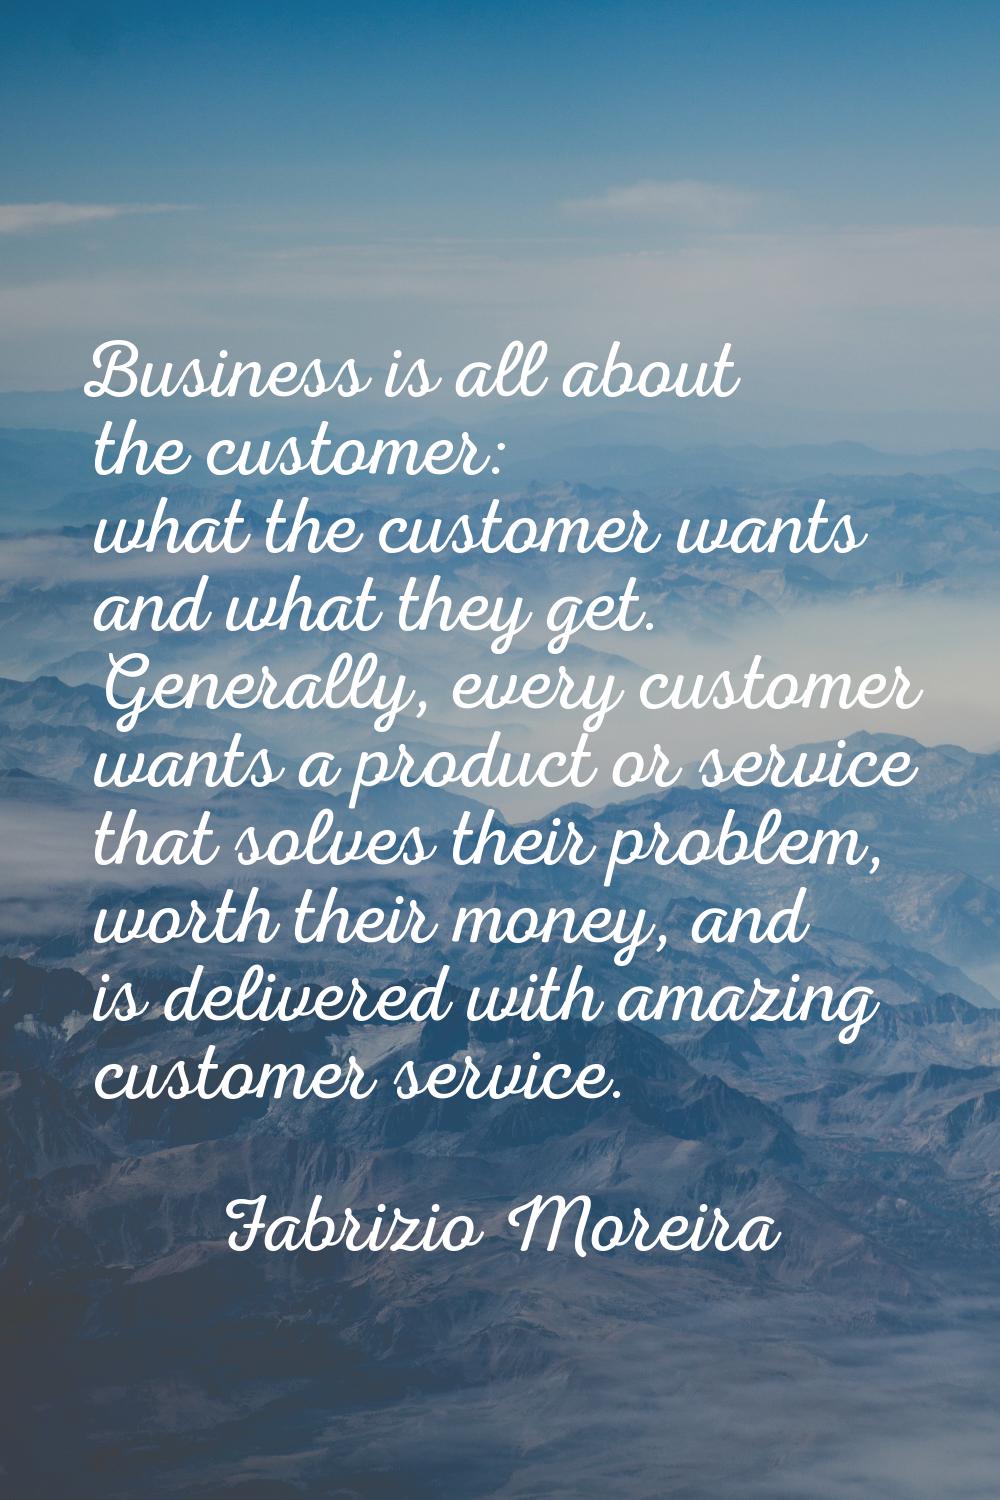 Business is all about the customer: what the customer wants and what they get. Generally, every cus